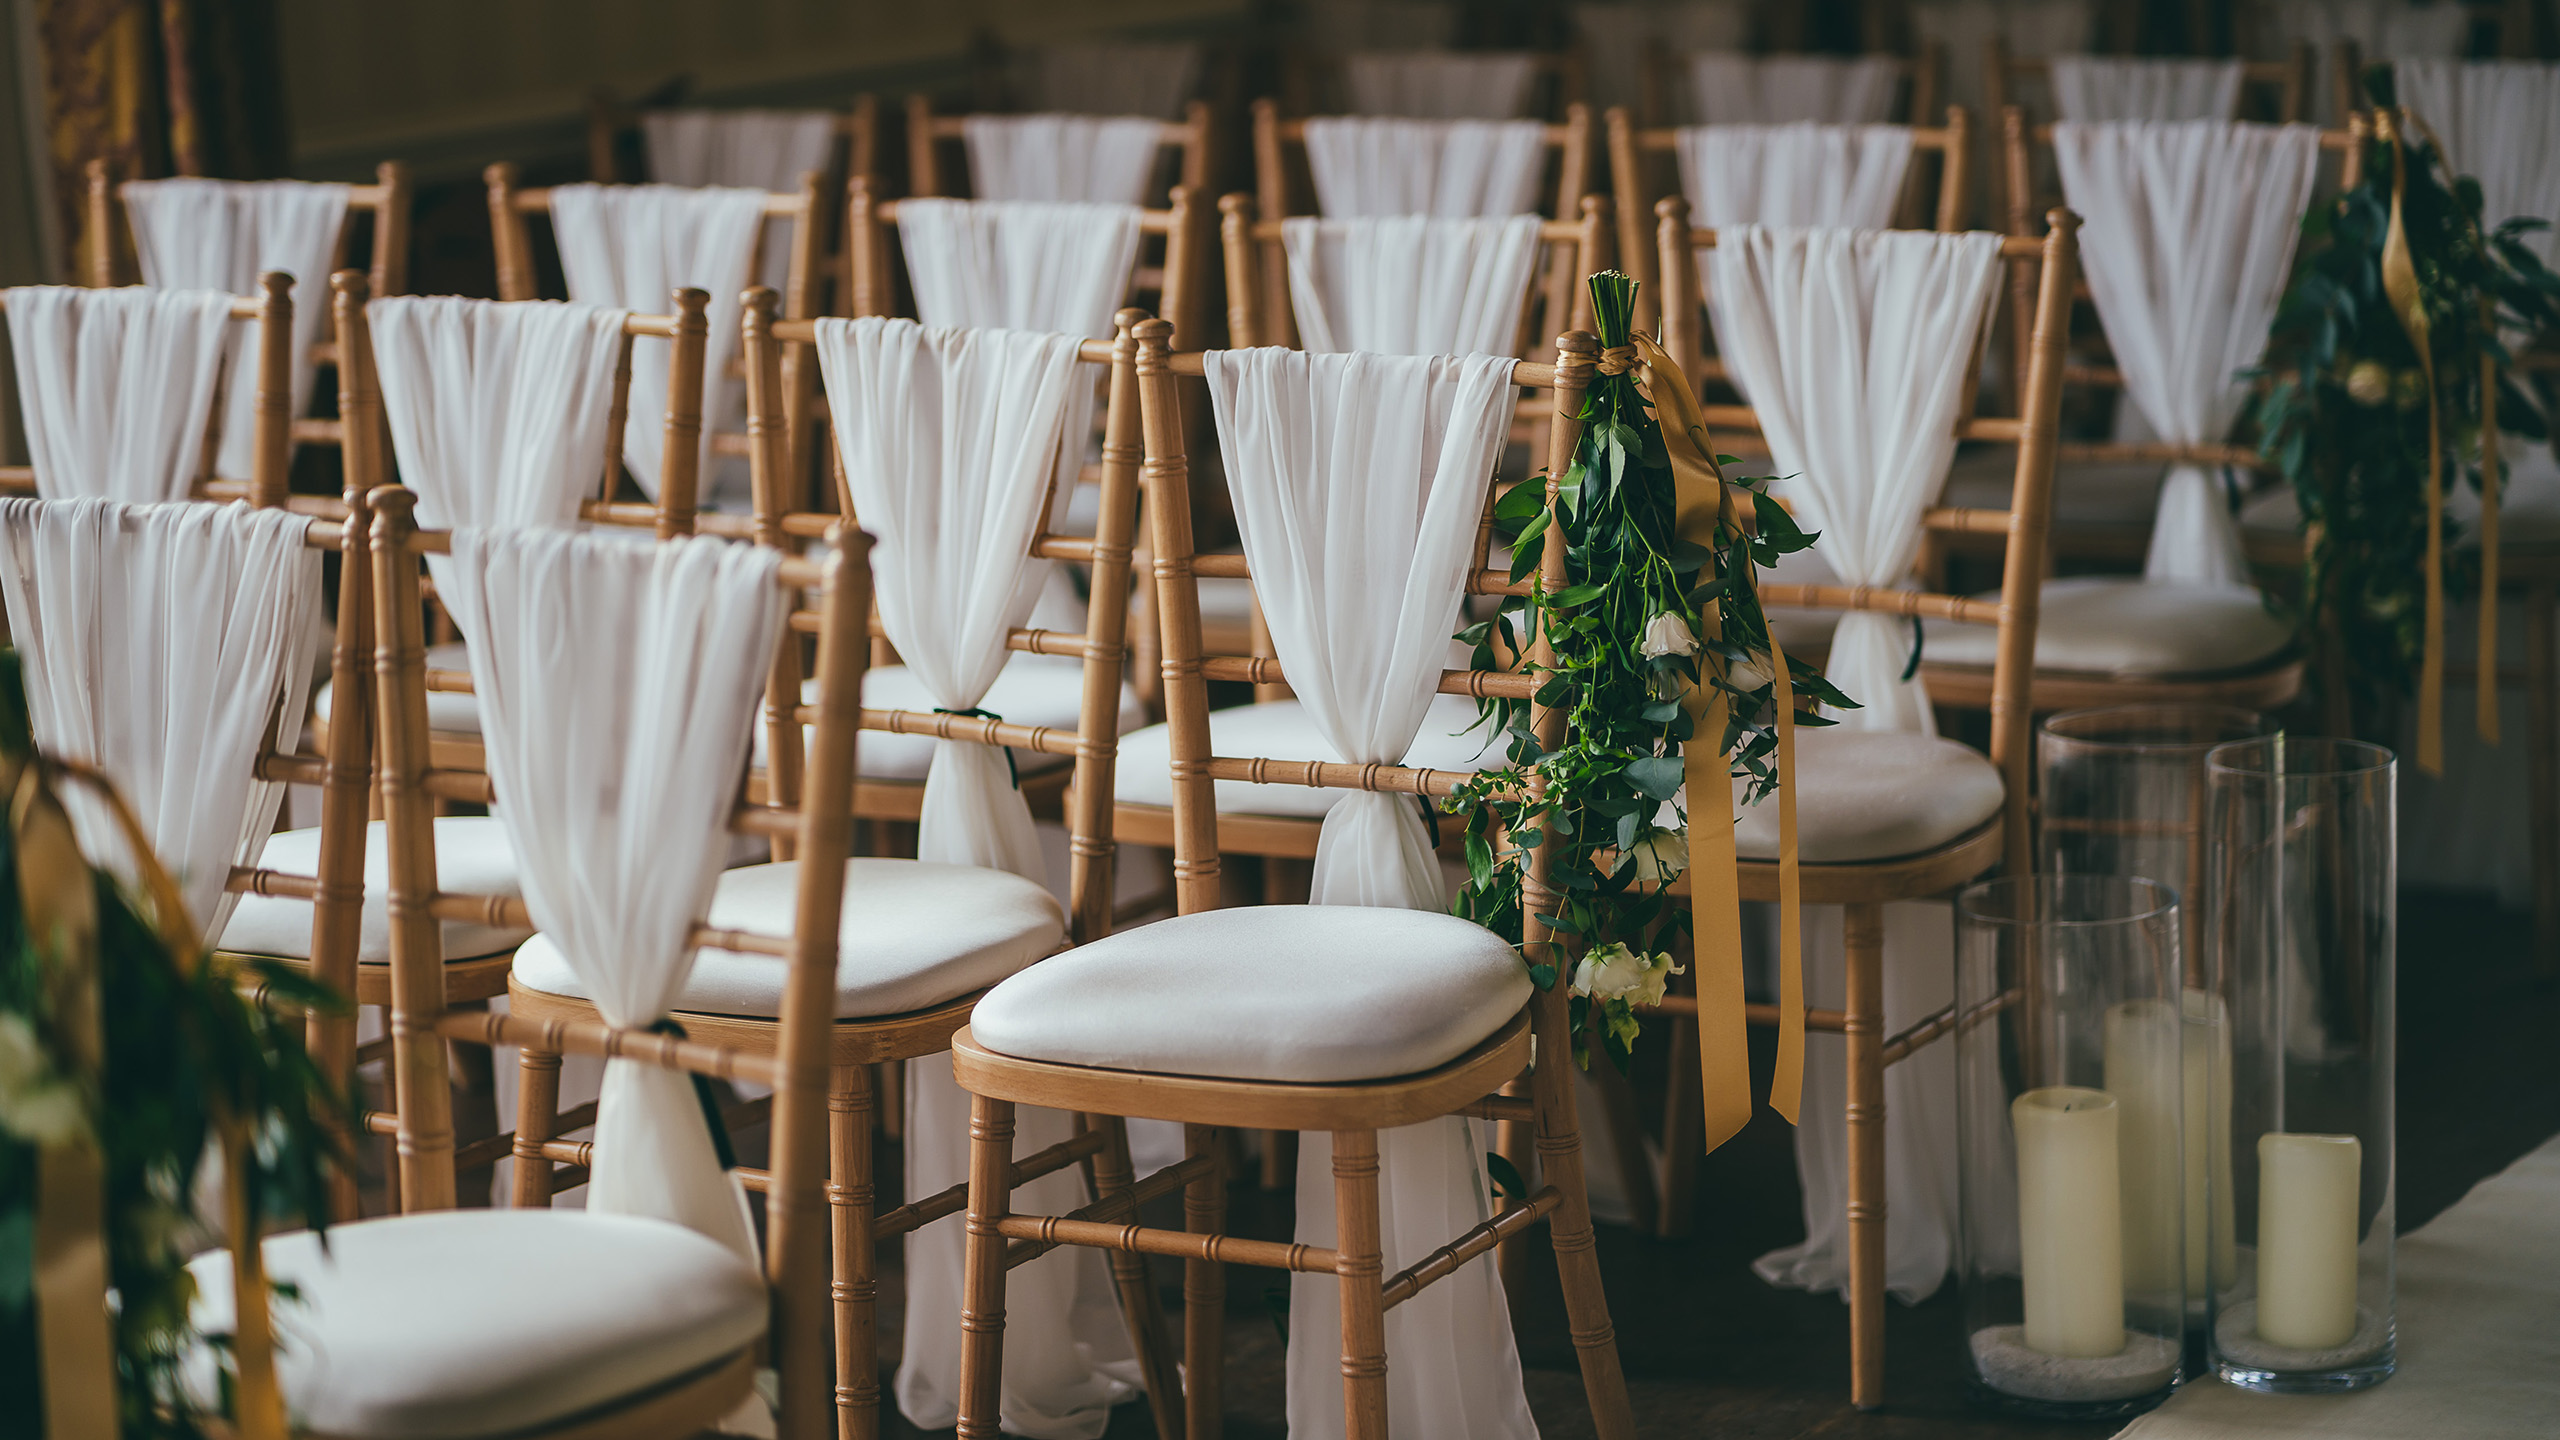 Wedding chairs set up in Swinton Park Hotel in North Yorkshire